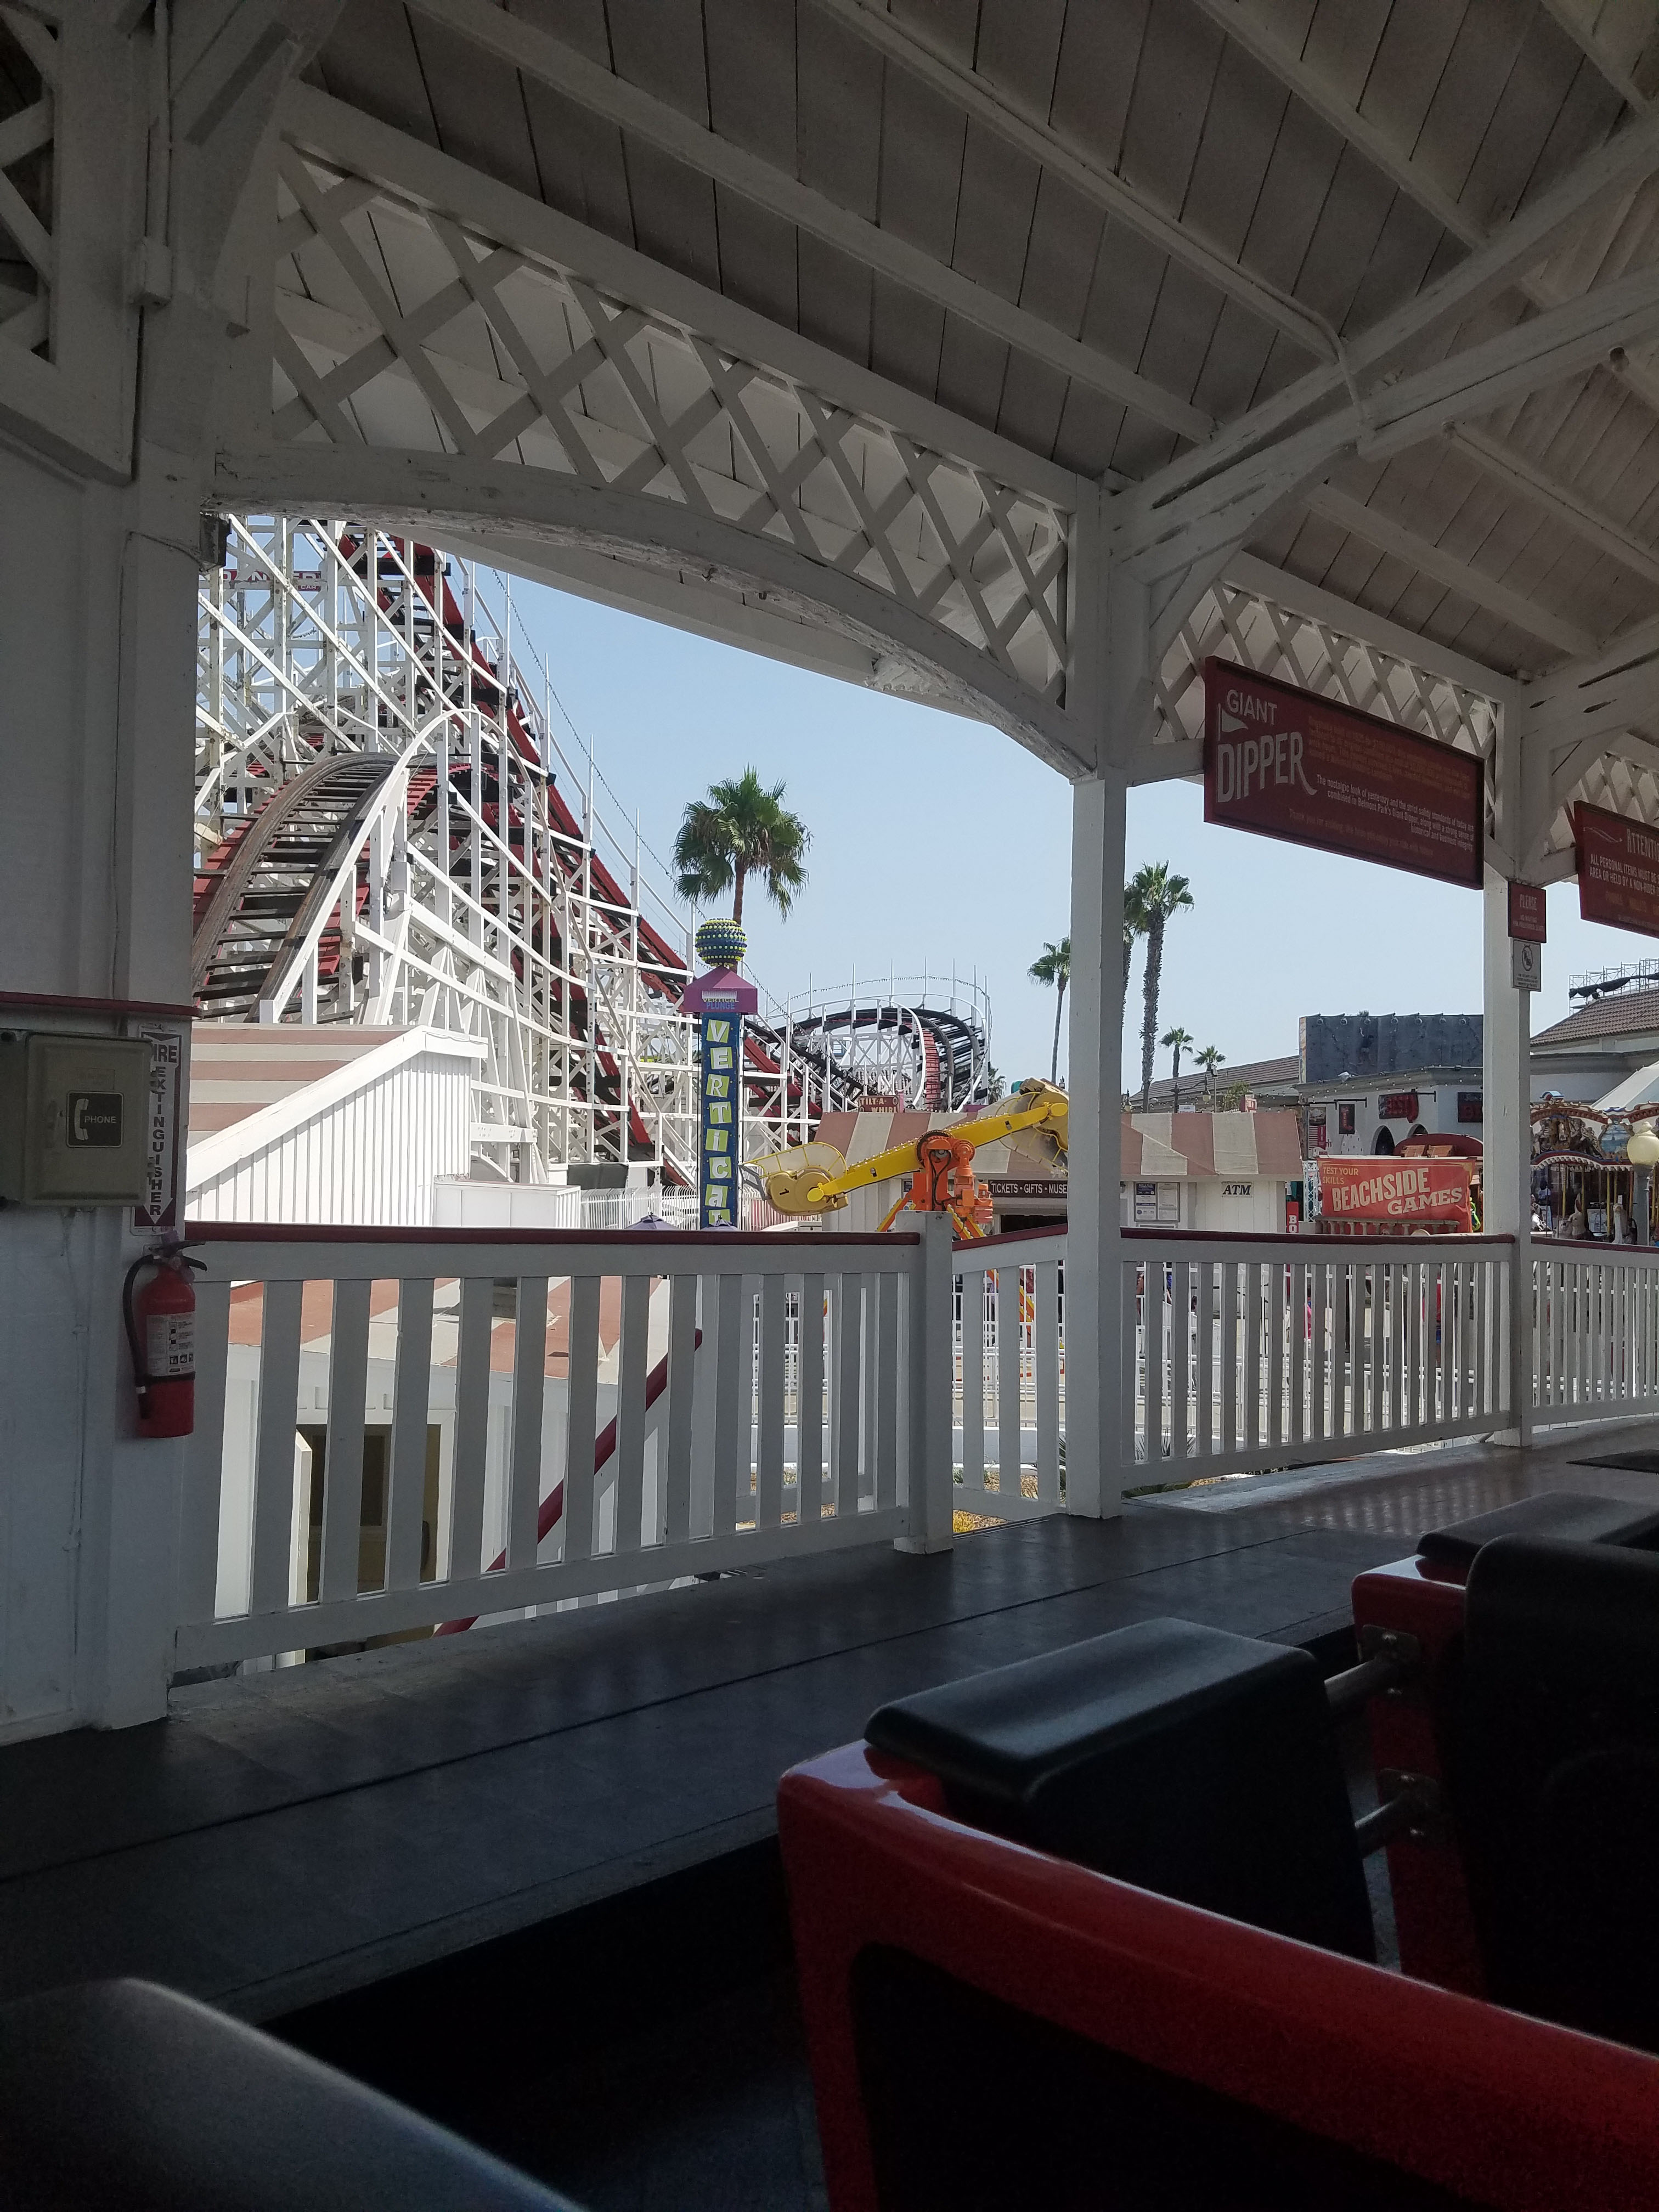 Guide to San Diego’s Belmont Park